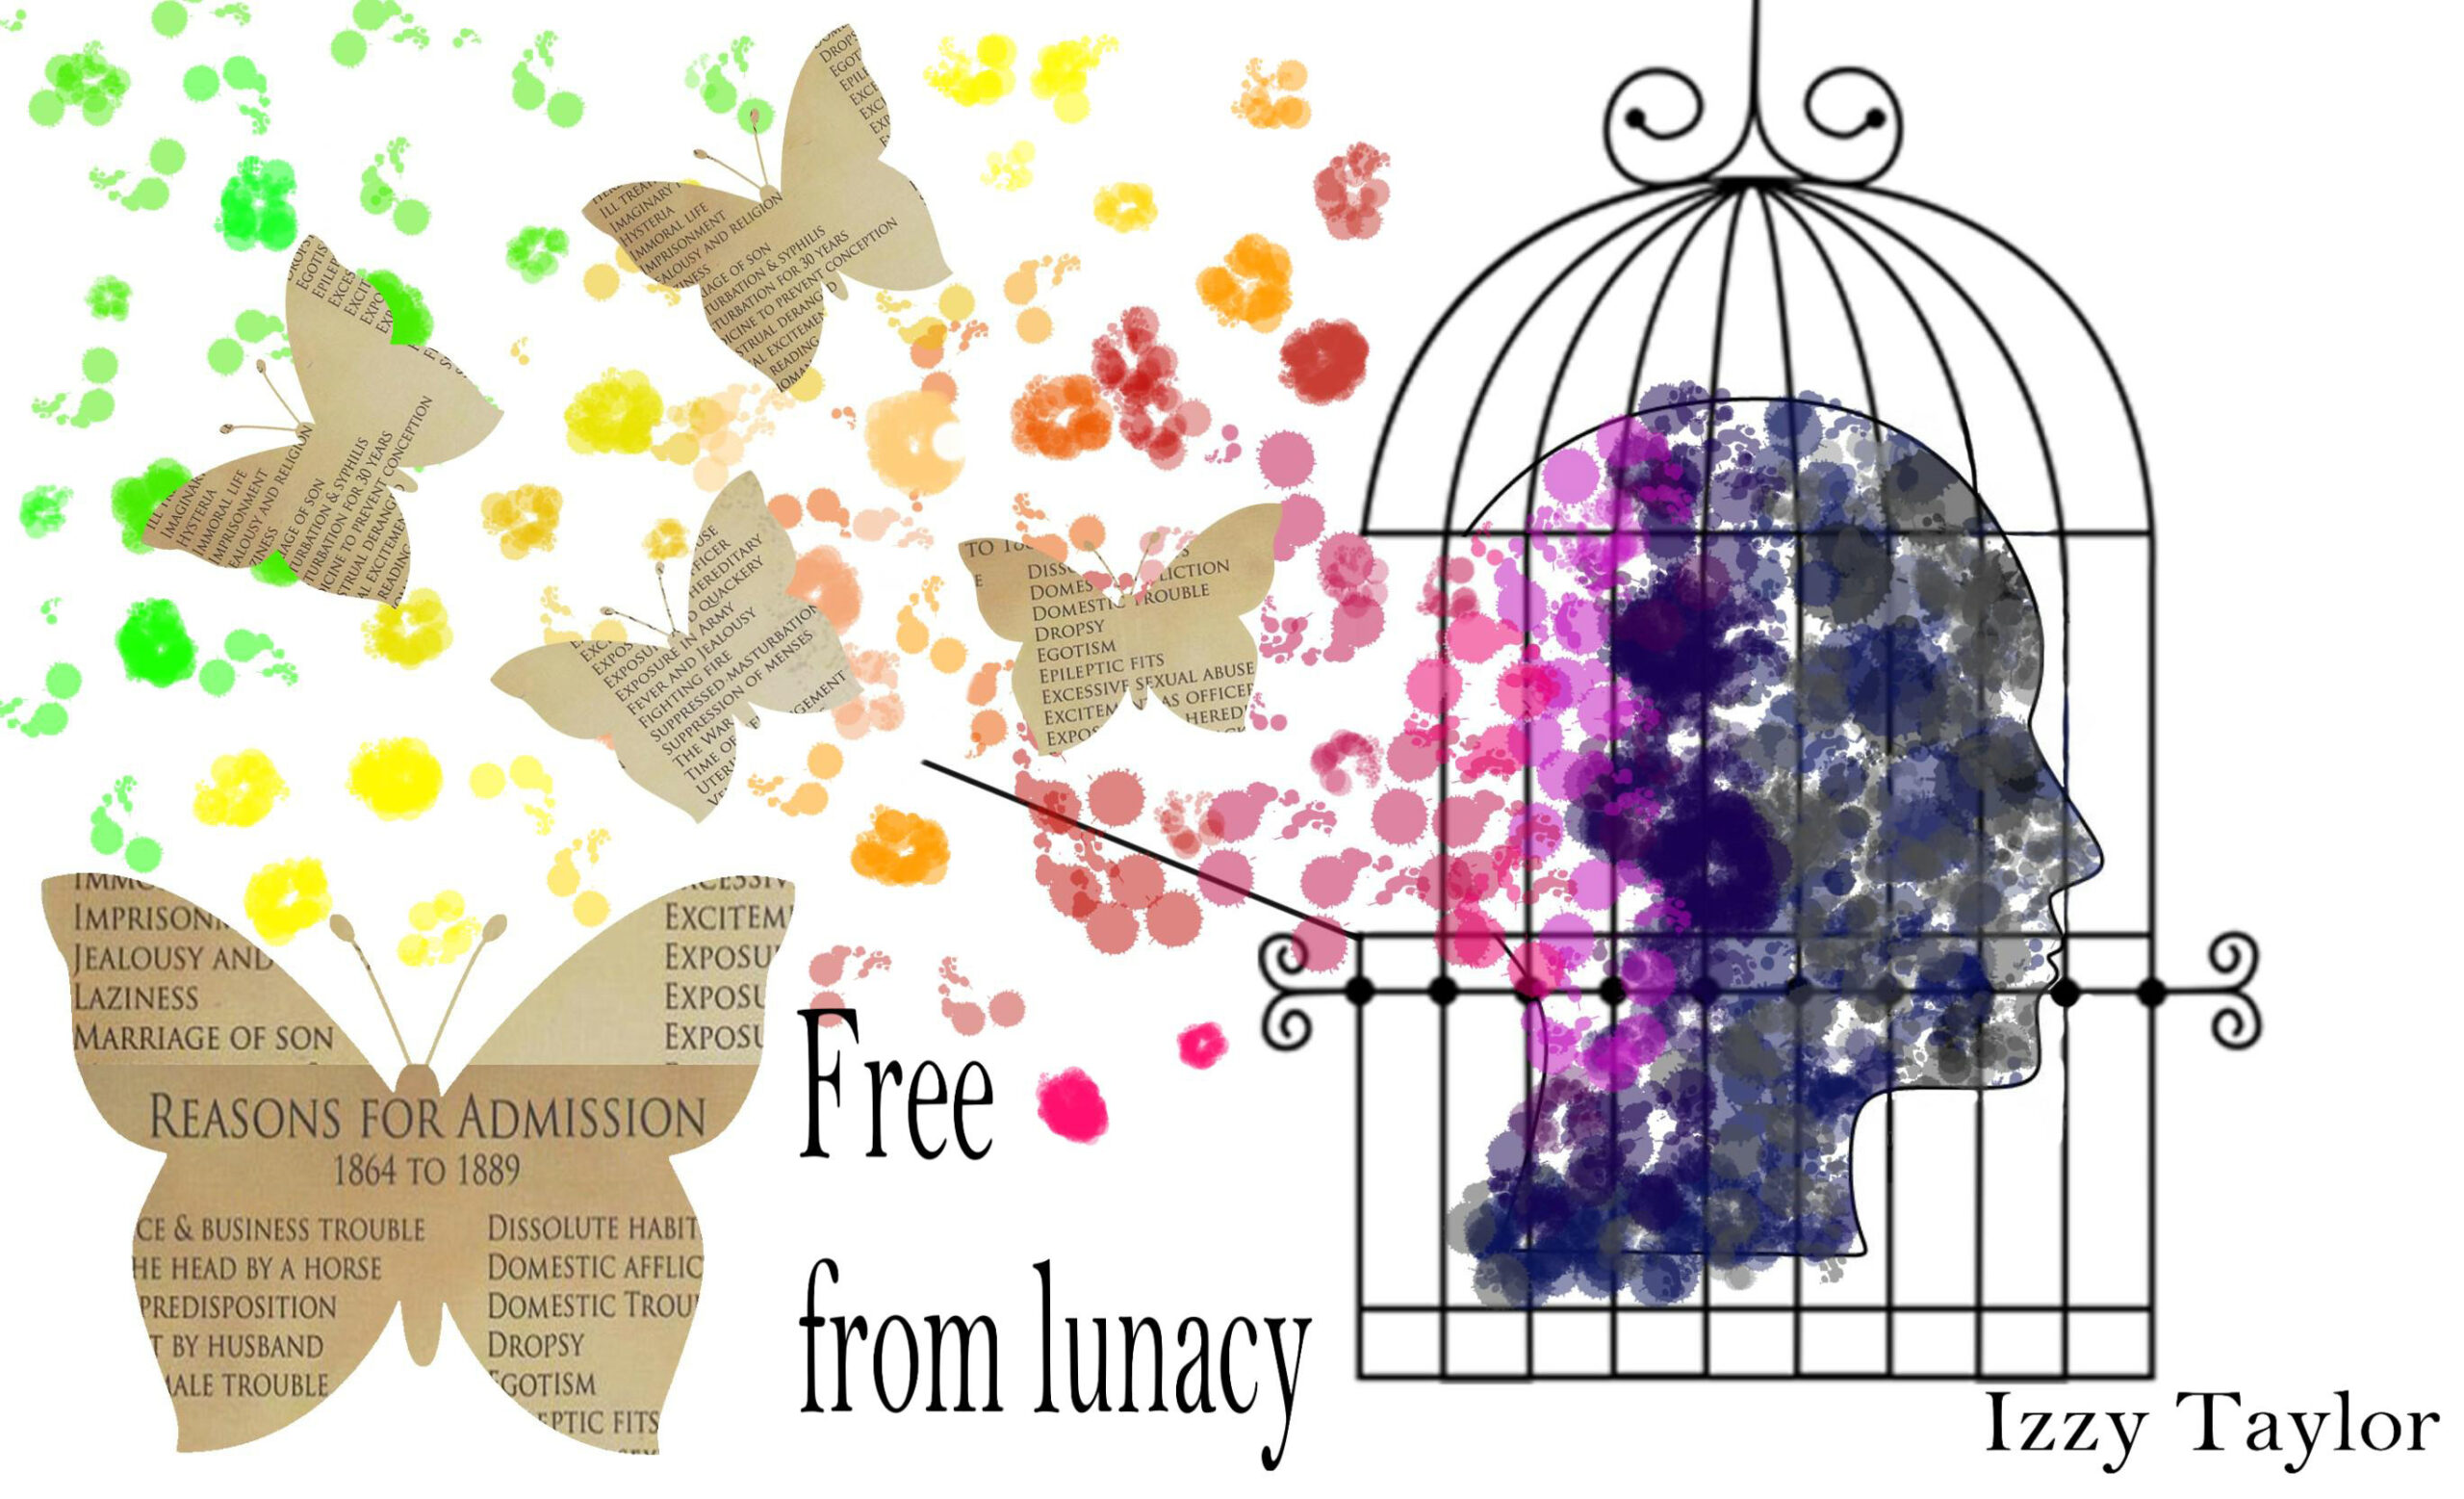 Artwork depicting a head in a birdcage, dissolving into rainbow dots and butterflies next to the words 'Free from lunacy'.